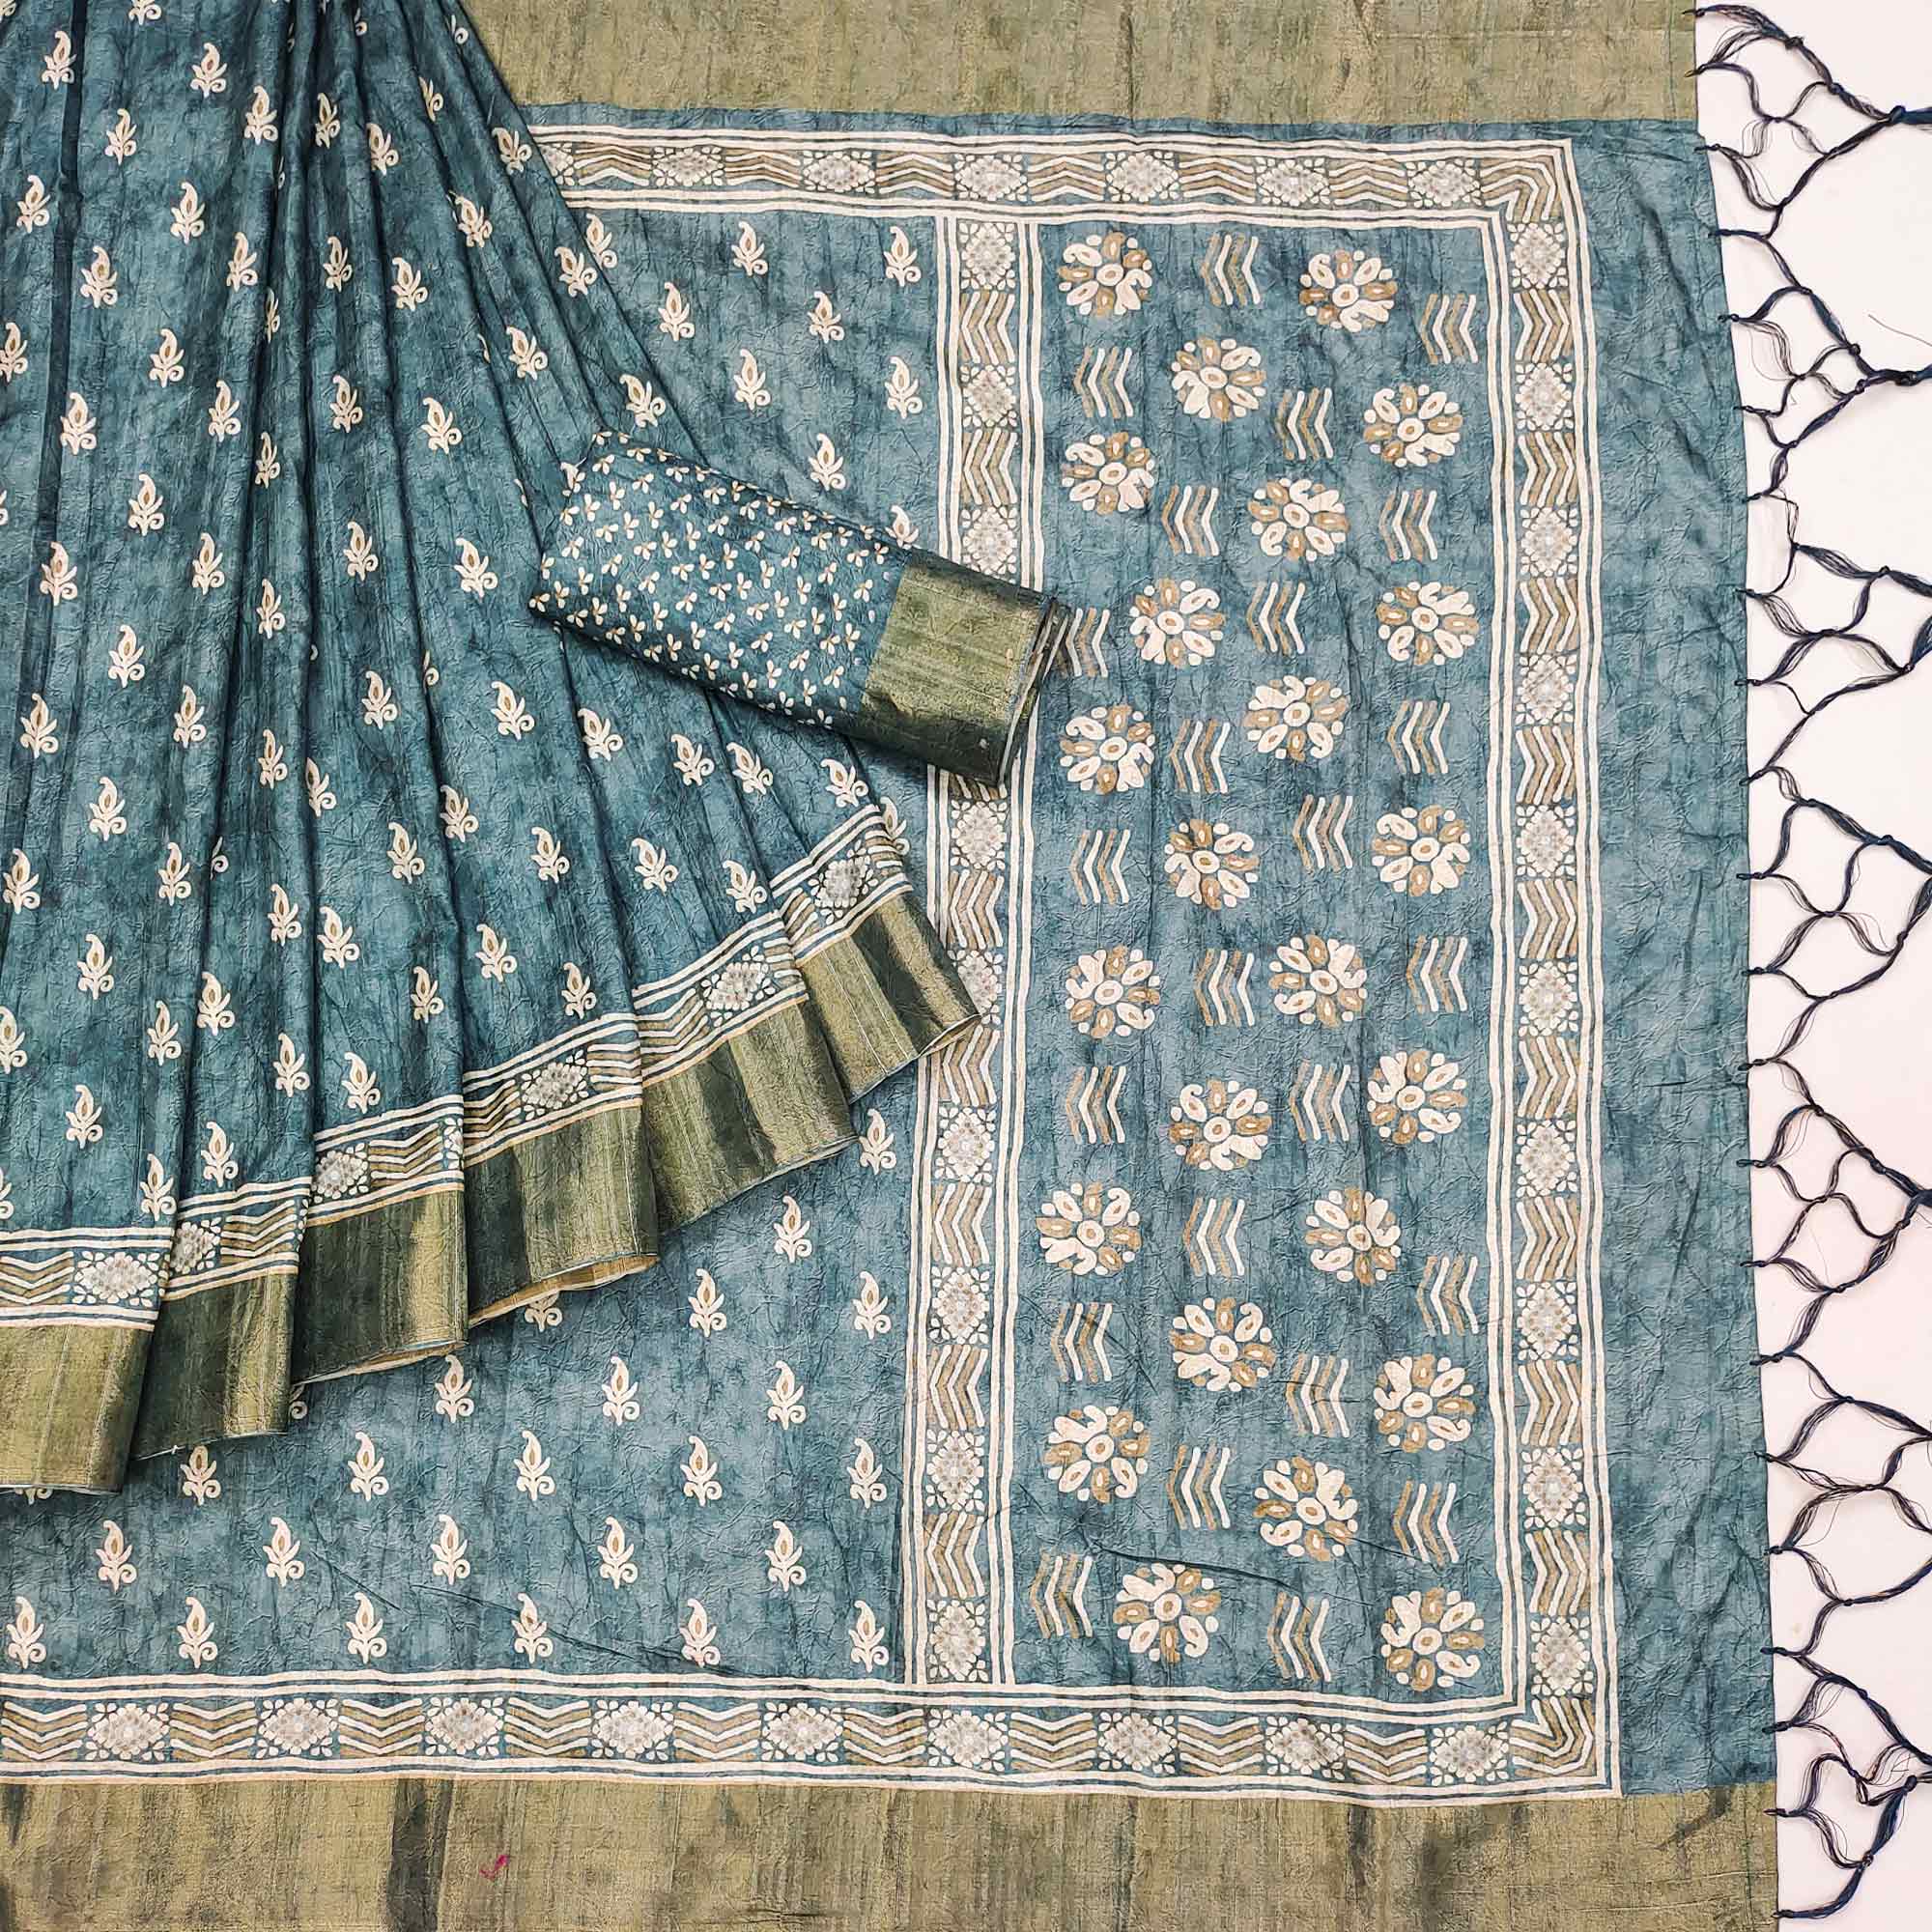 Blue Floral Printed Matka Tussar Saree With Tassels